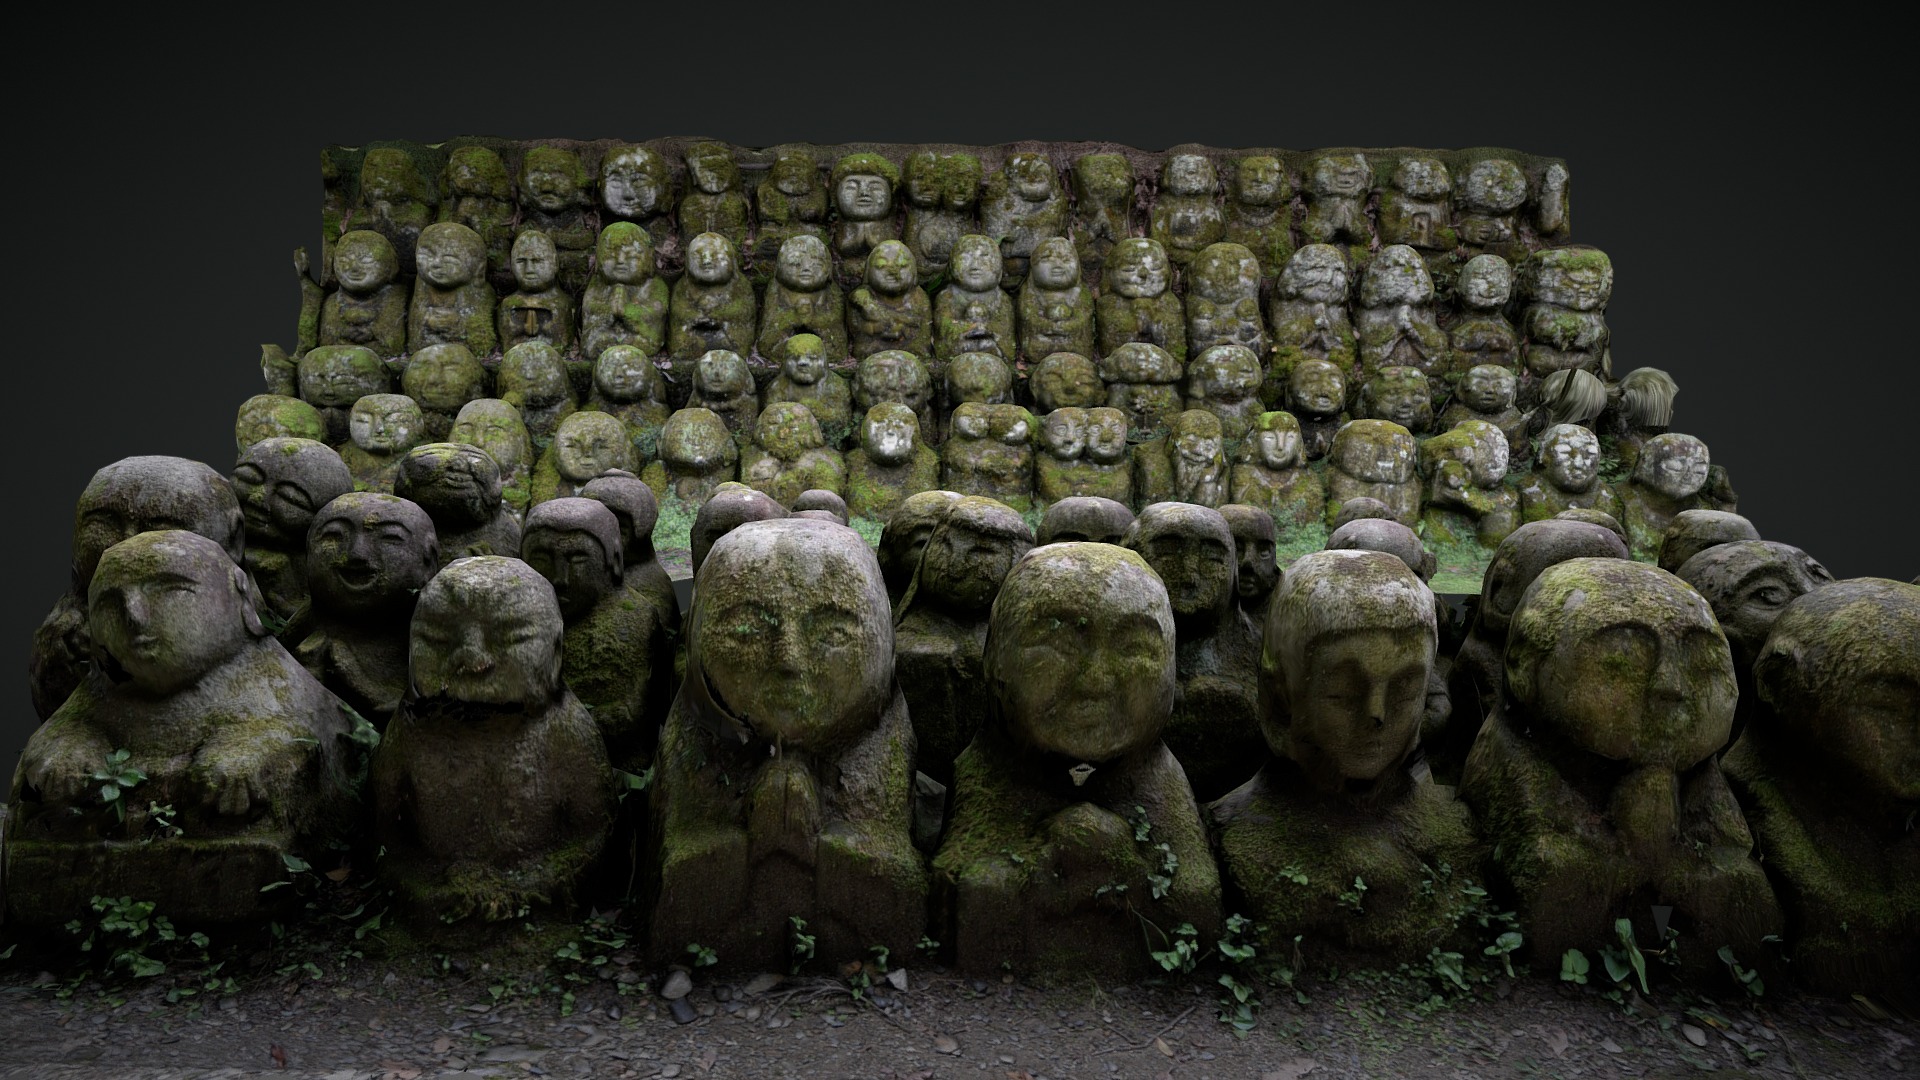 3D model Rakan statues at Otagi Nenbutsu - This is a 3D model of the Rakan statues at Otagi Nenbutsu. The 3D model is about a group of rocks stacked together.